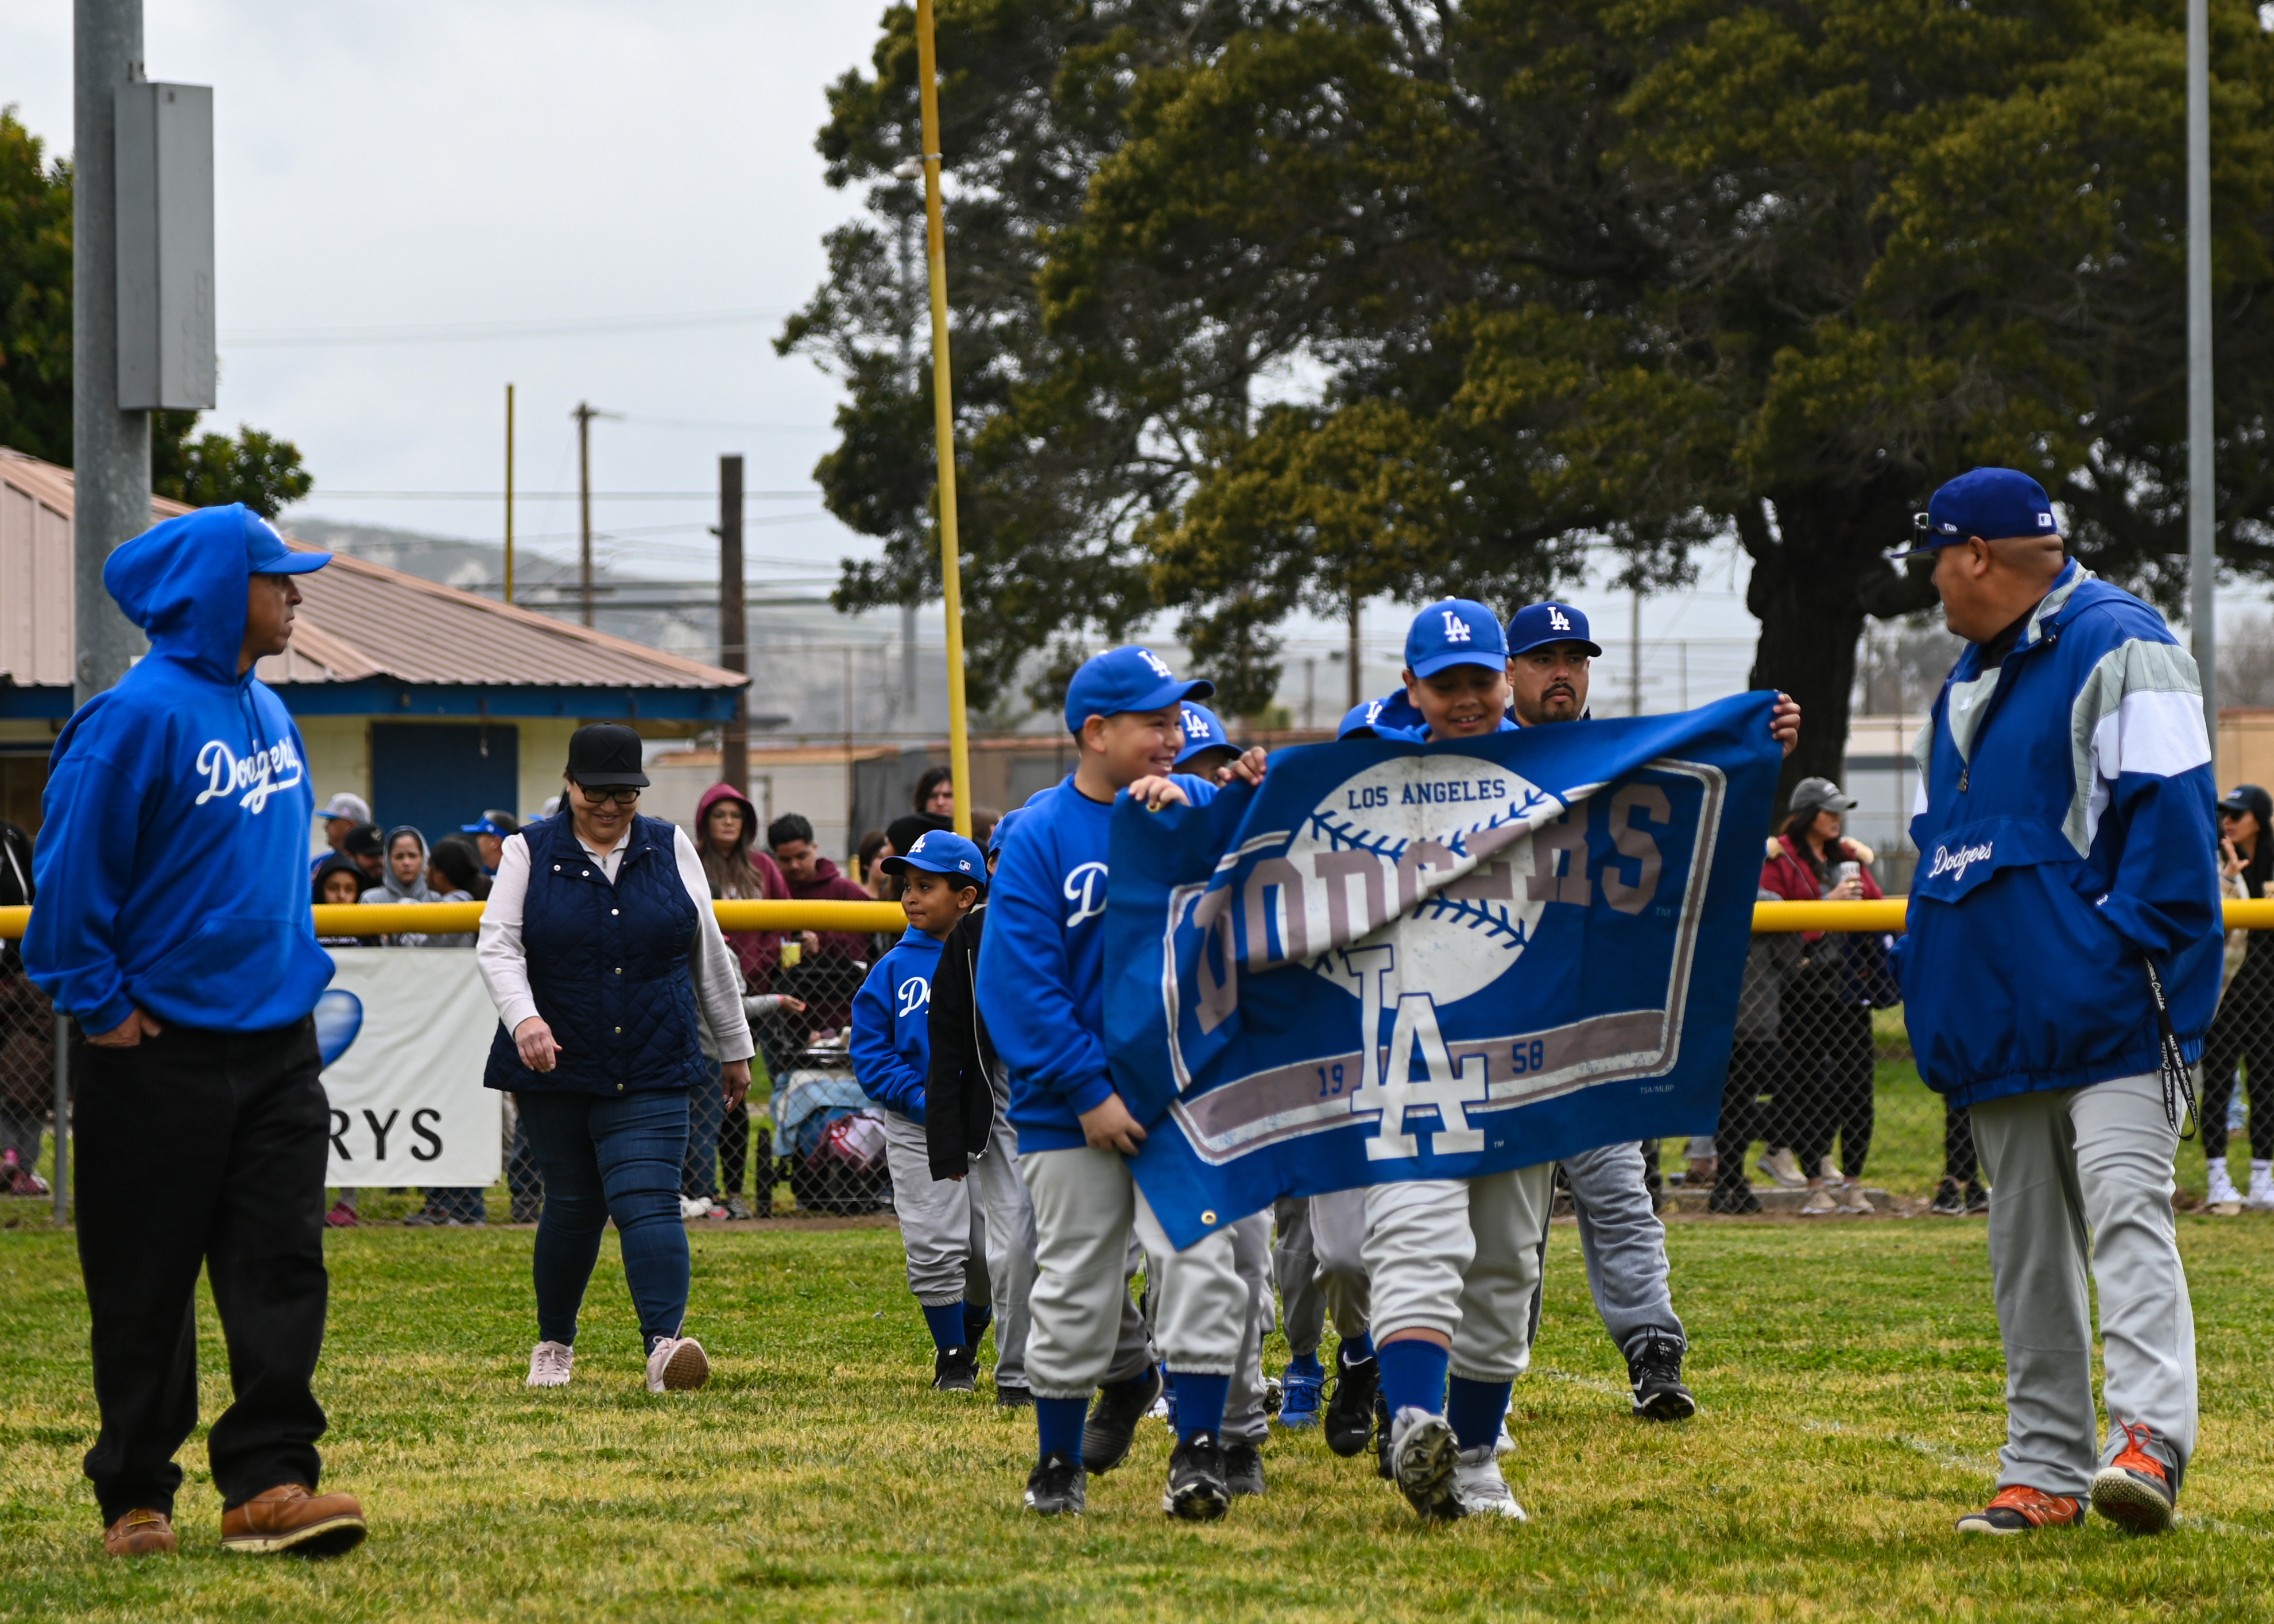 SLD 30 Honor Guard Presents the Colors at Lompoc Little League